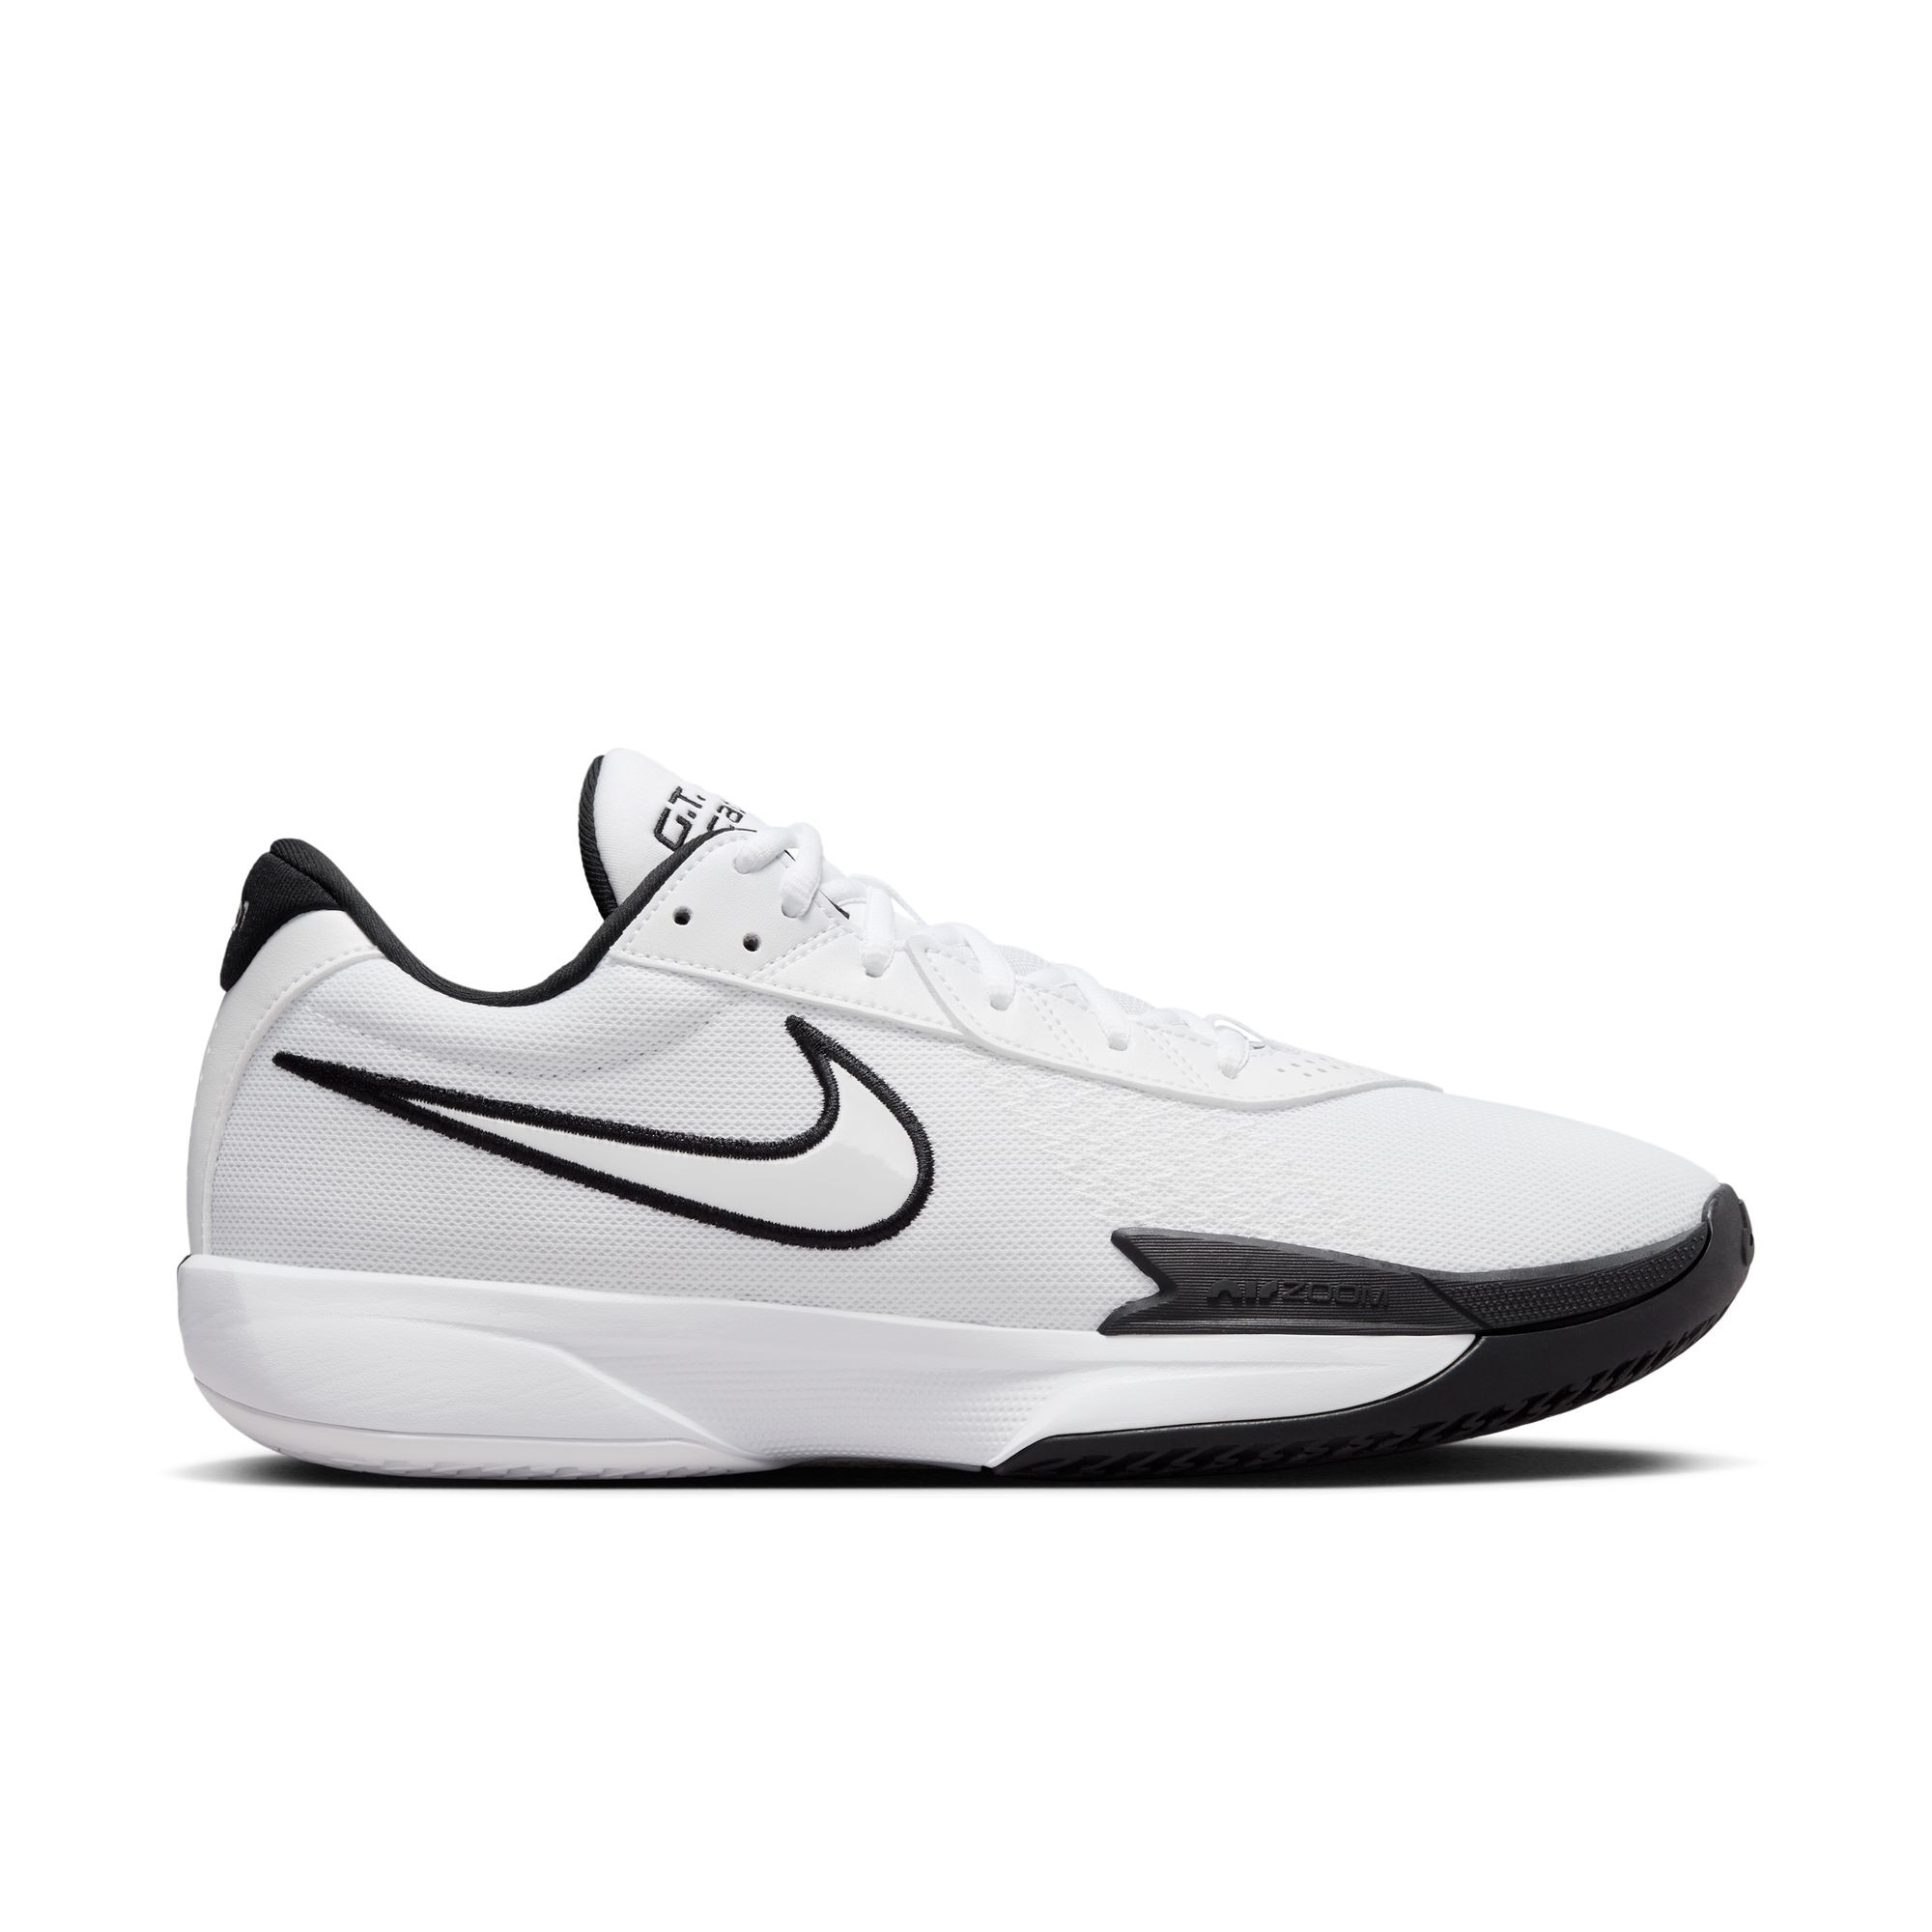 Nike GT Cut Academy Men's Basketball Shoes - White/Black-Summit White-Anthracite